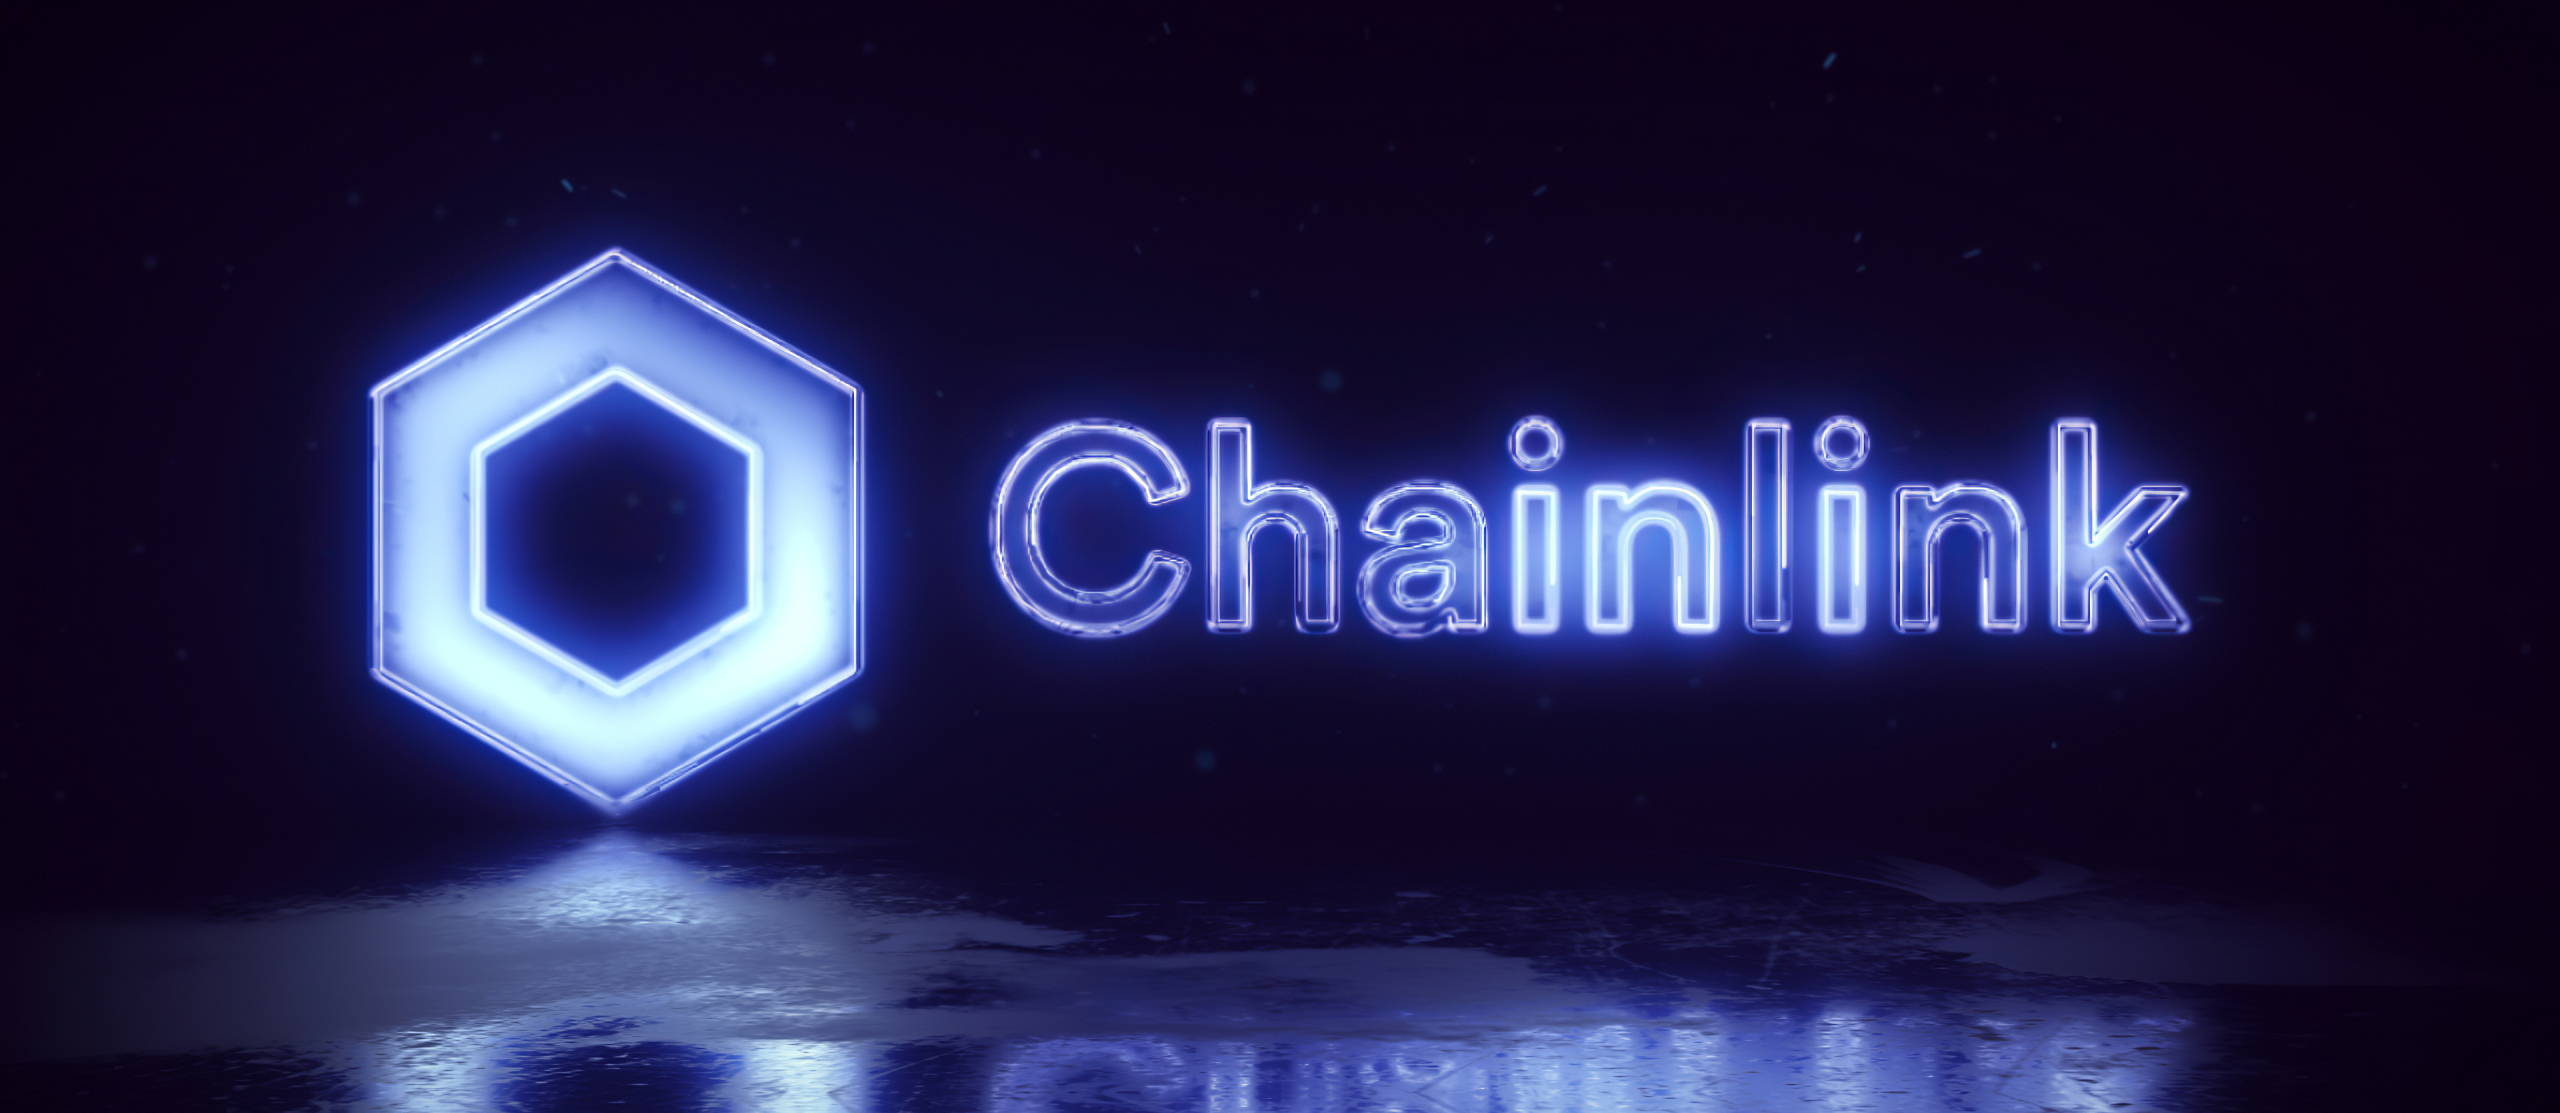 Galaxy Digital Partners With Chainlink To Provide Market Data To Blockchains